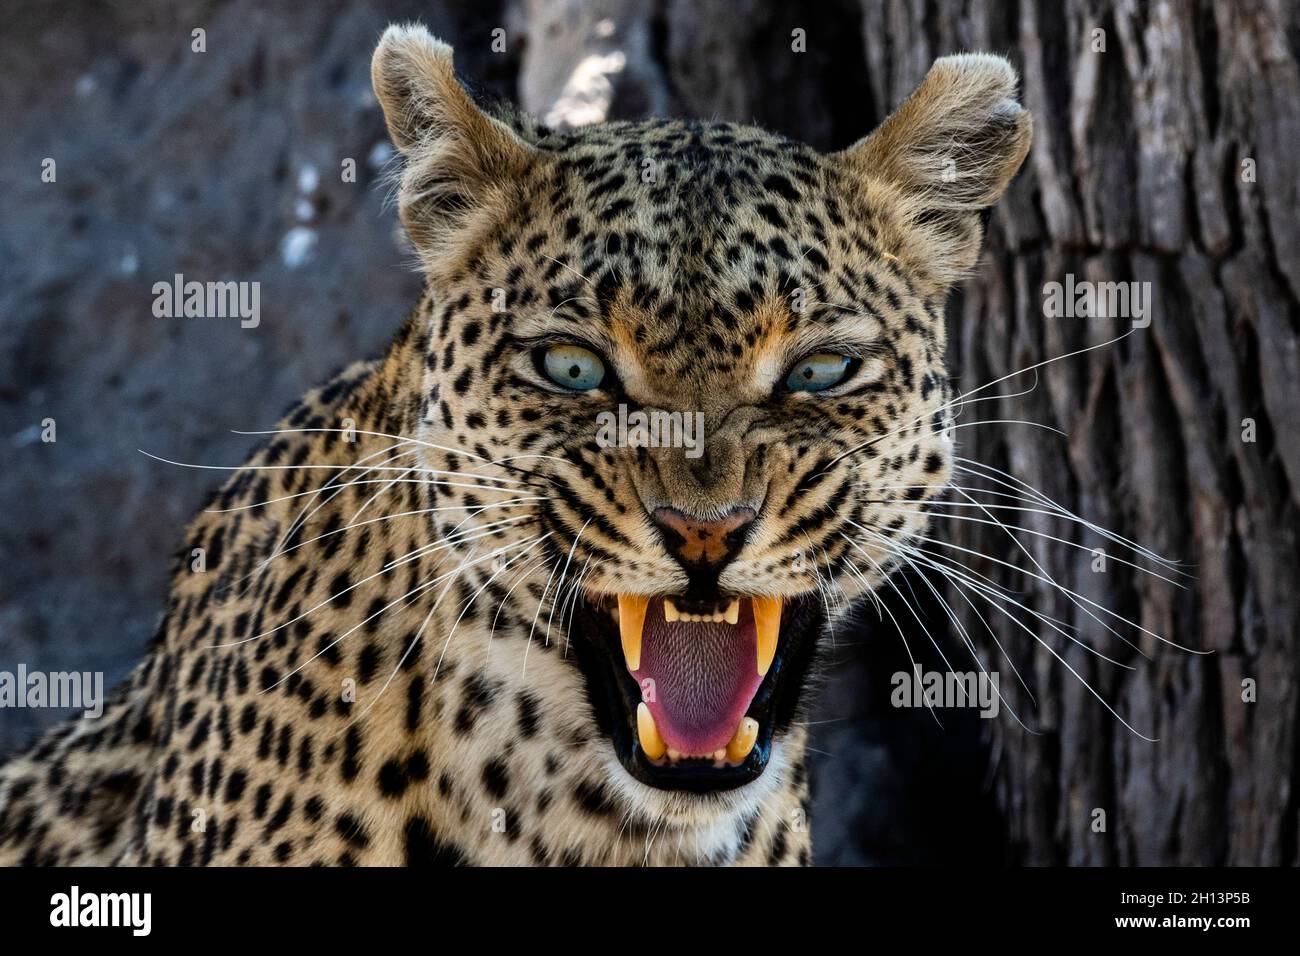 A leopard (Panthera pardus) snarling and looking at the camera, Okavango Delta, Botswana. Stock Photo